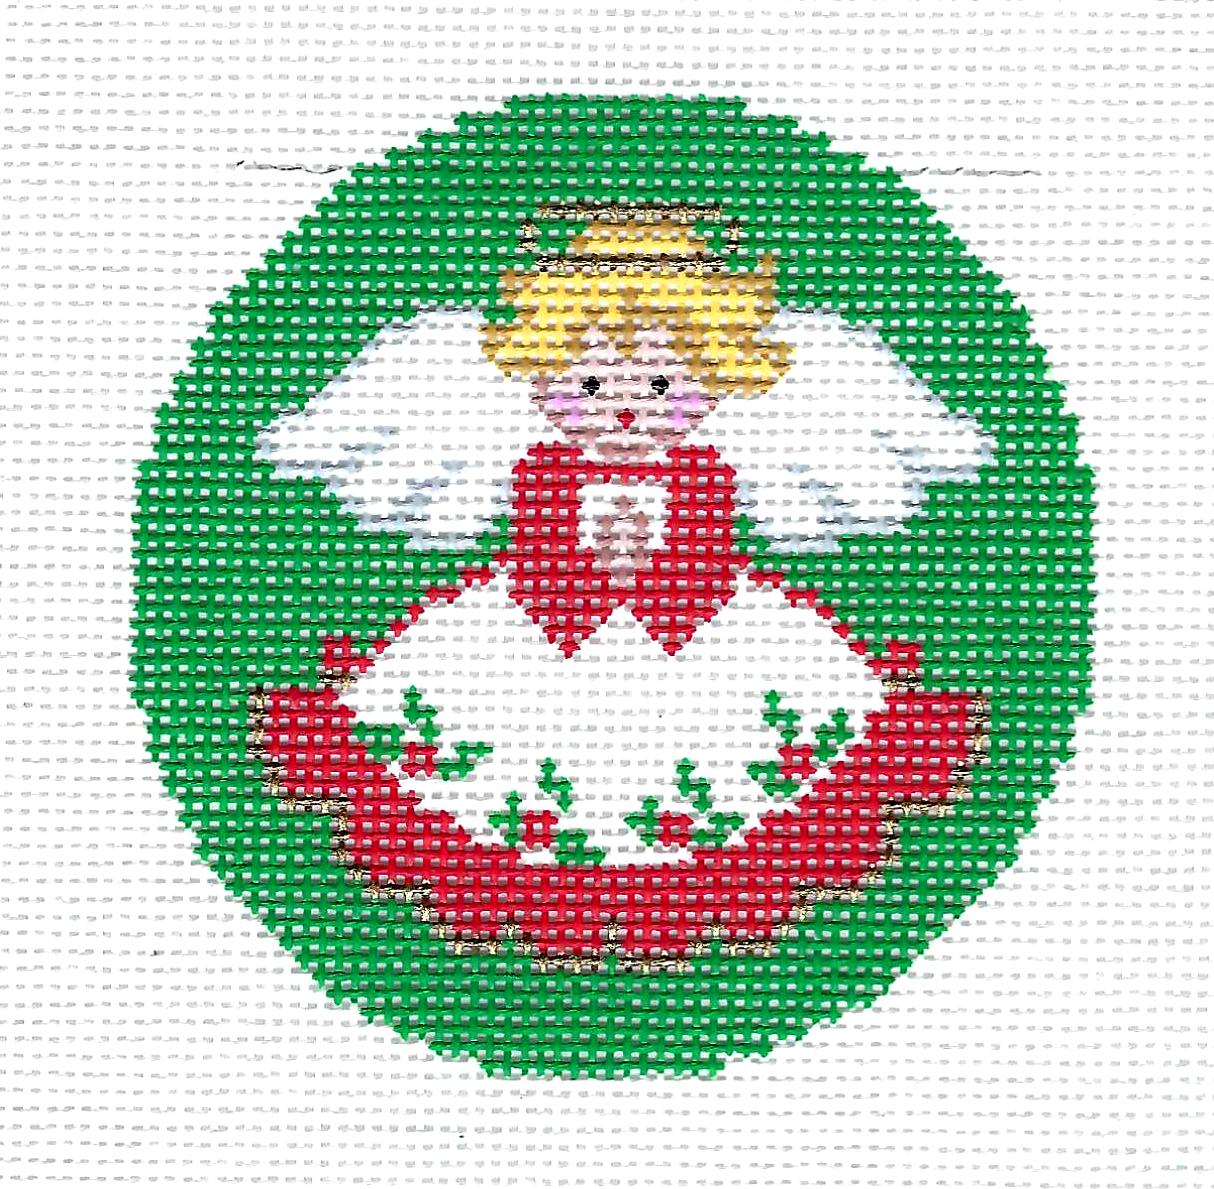 Round ~ Christmas Angel in Red & White Dress on Green Background 3" Rd. 18 mesh HP Needlepoint Canvas Ornament by LEE